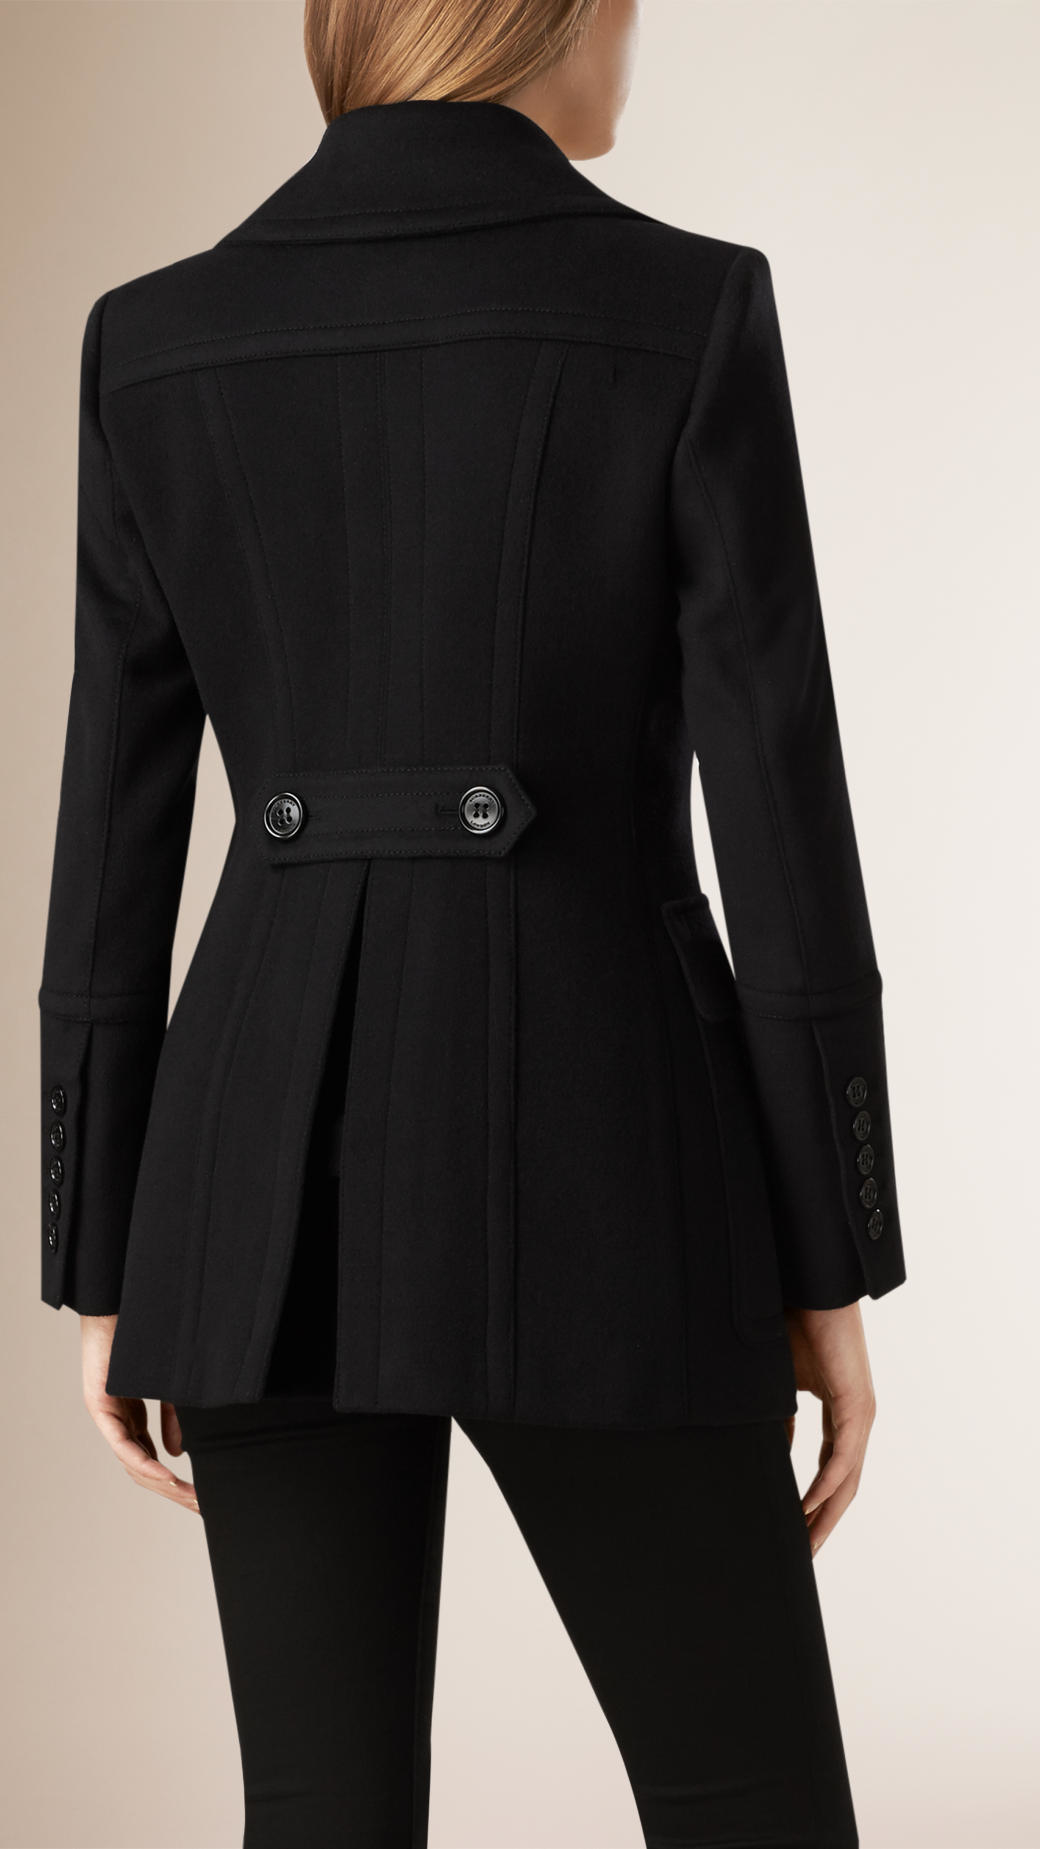 Lyst - Burberry Wool Cashmere Pea Coat in Black